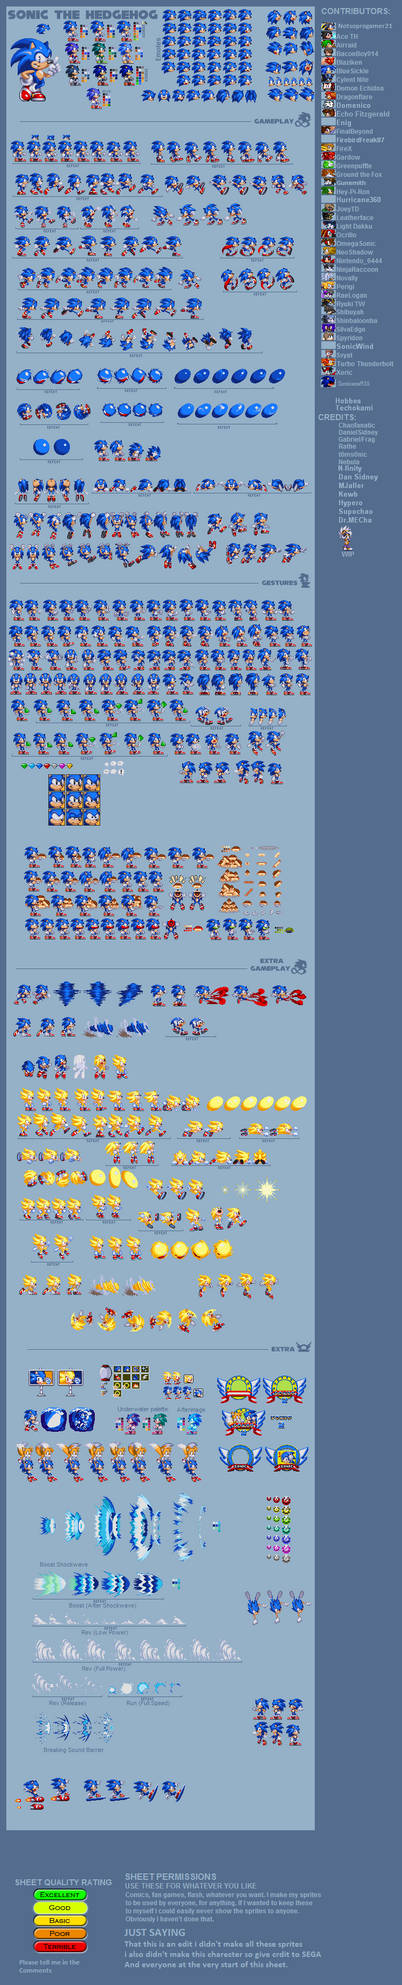 Sonic 1 Redefined - Sonic Sprites by JacobLeBeauREAL on DeviantArt